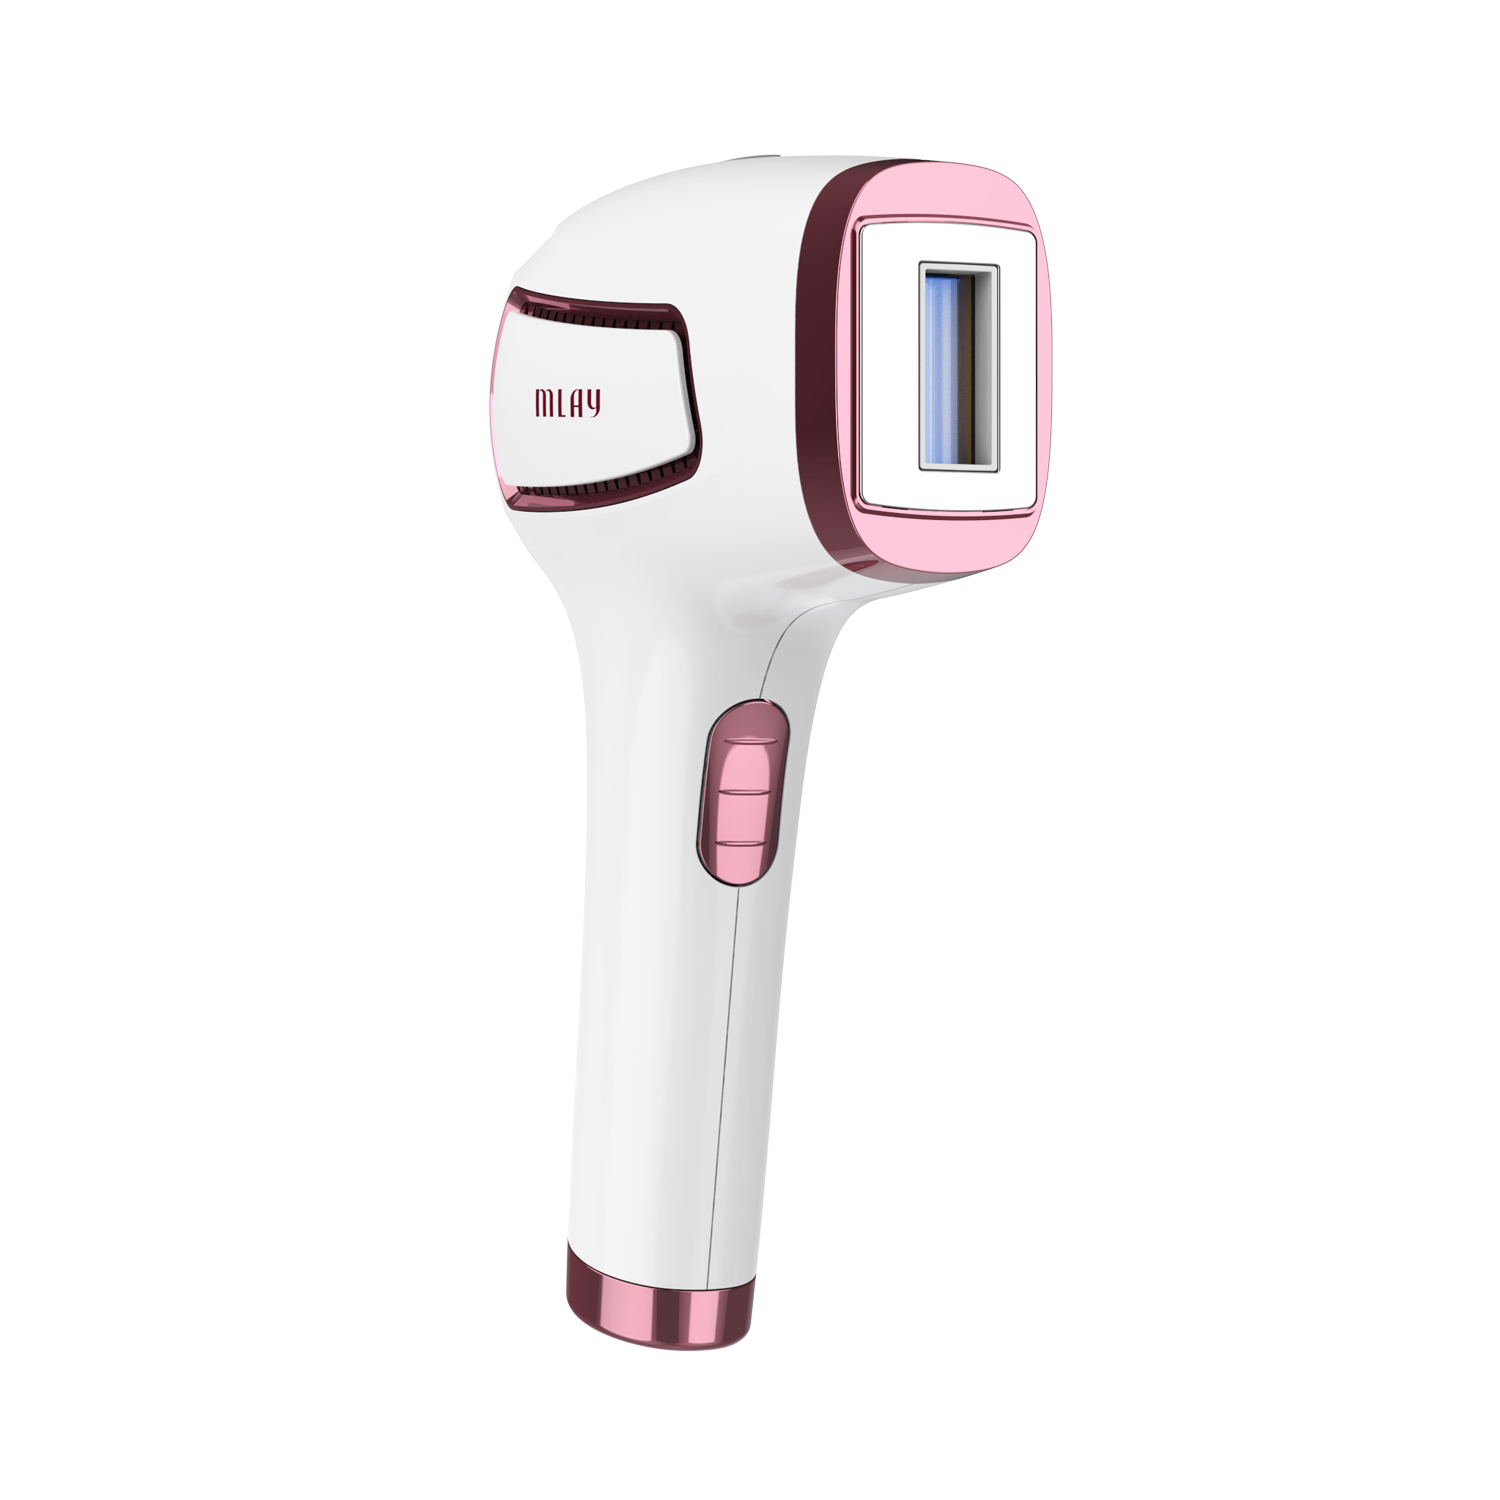 IPL Laser Hair Removal Ice Cooling Skin Rejuvenation Personal Care Device with Auto And Manual Mode